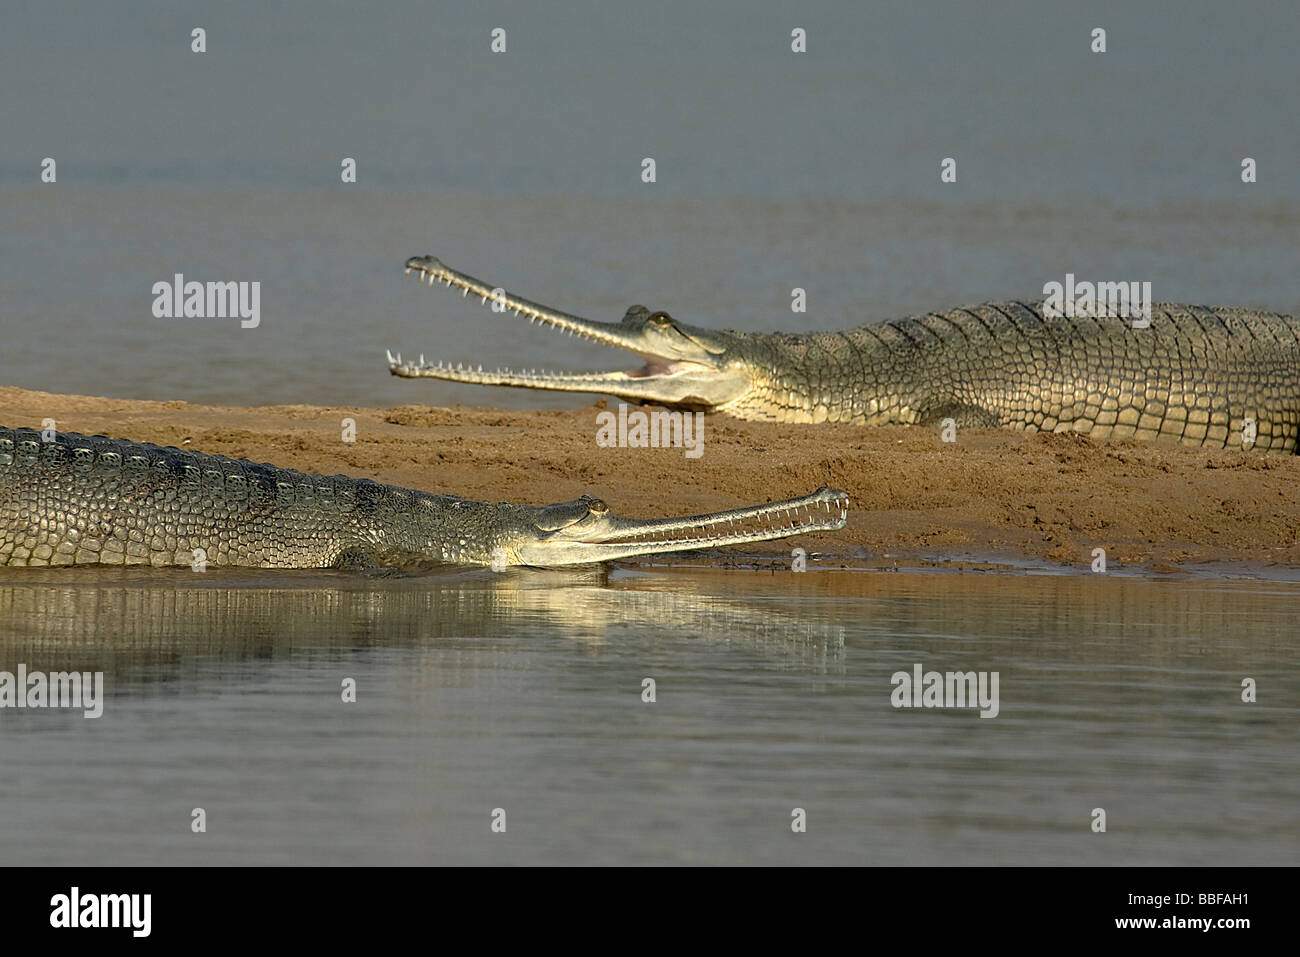 Gharial or gavial in the Chambal River India Stock Photo